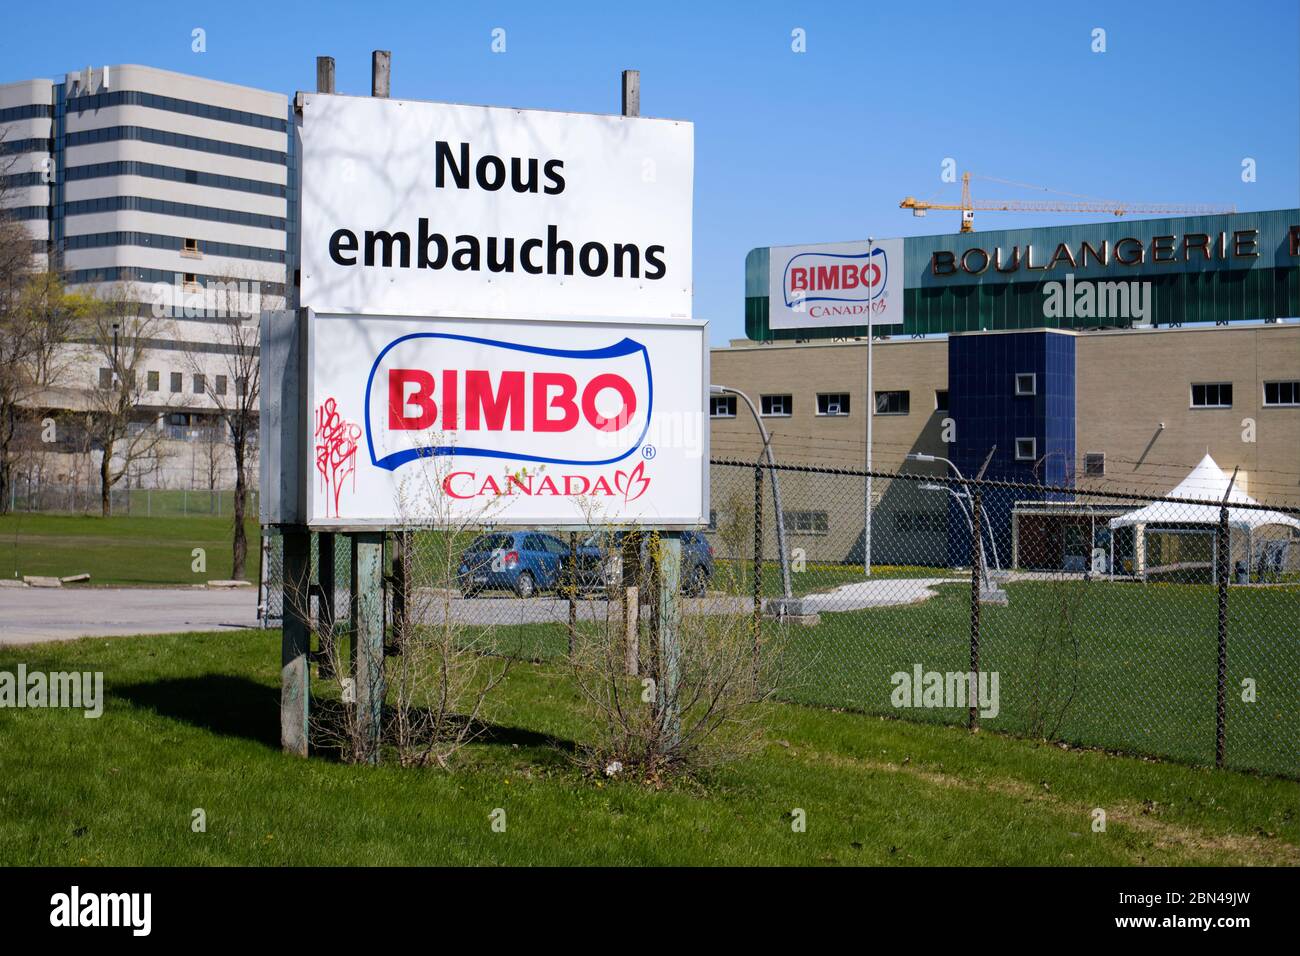 'We hire' sign outside the Bimbo Canada Bread factory in east end of Montreal Stock Photo